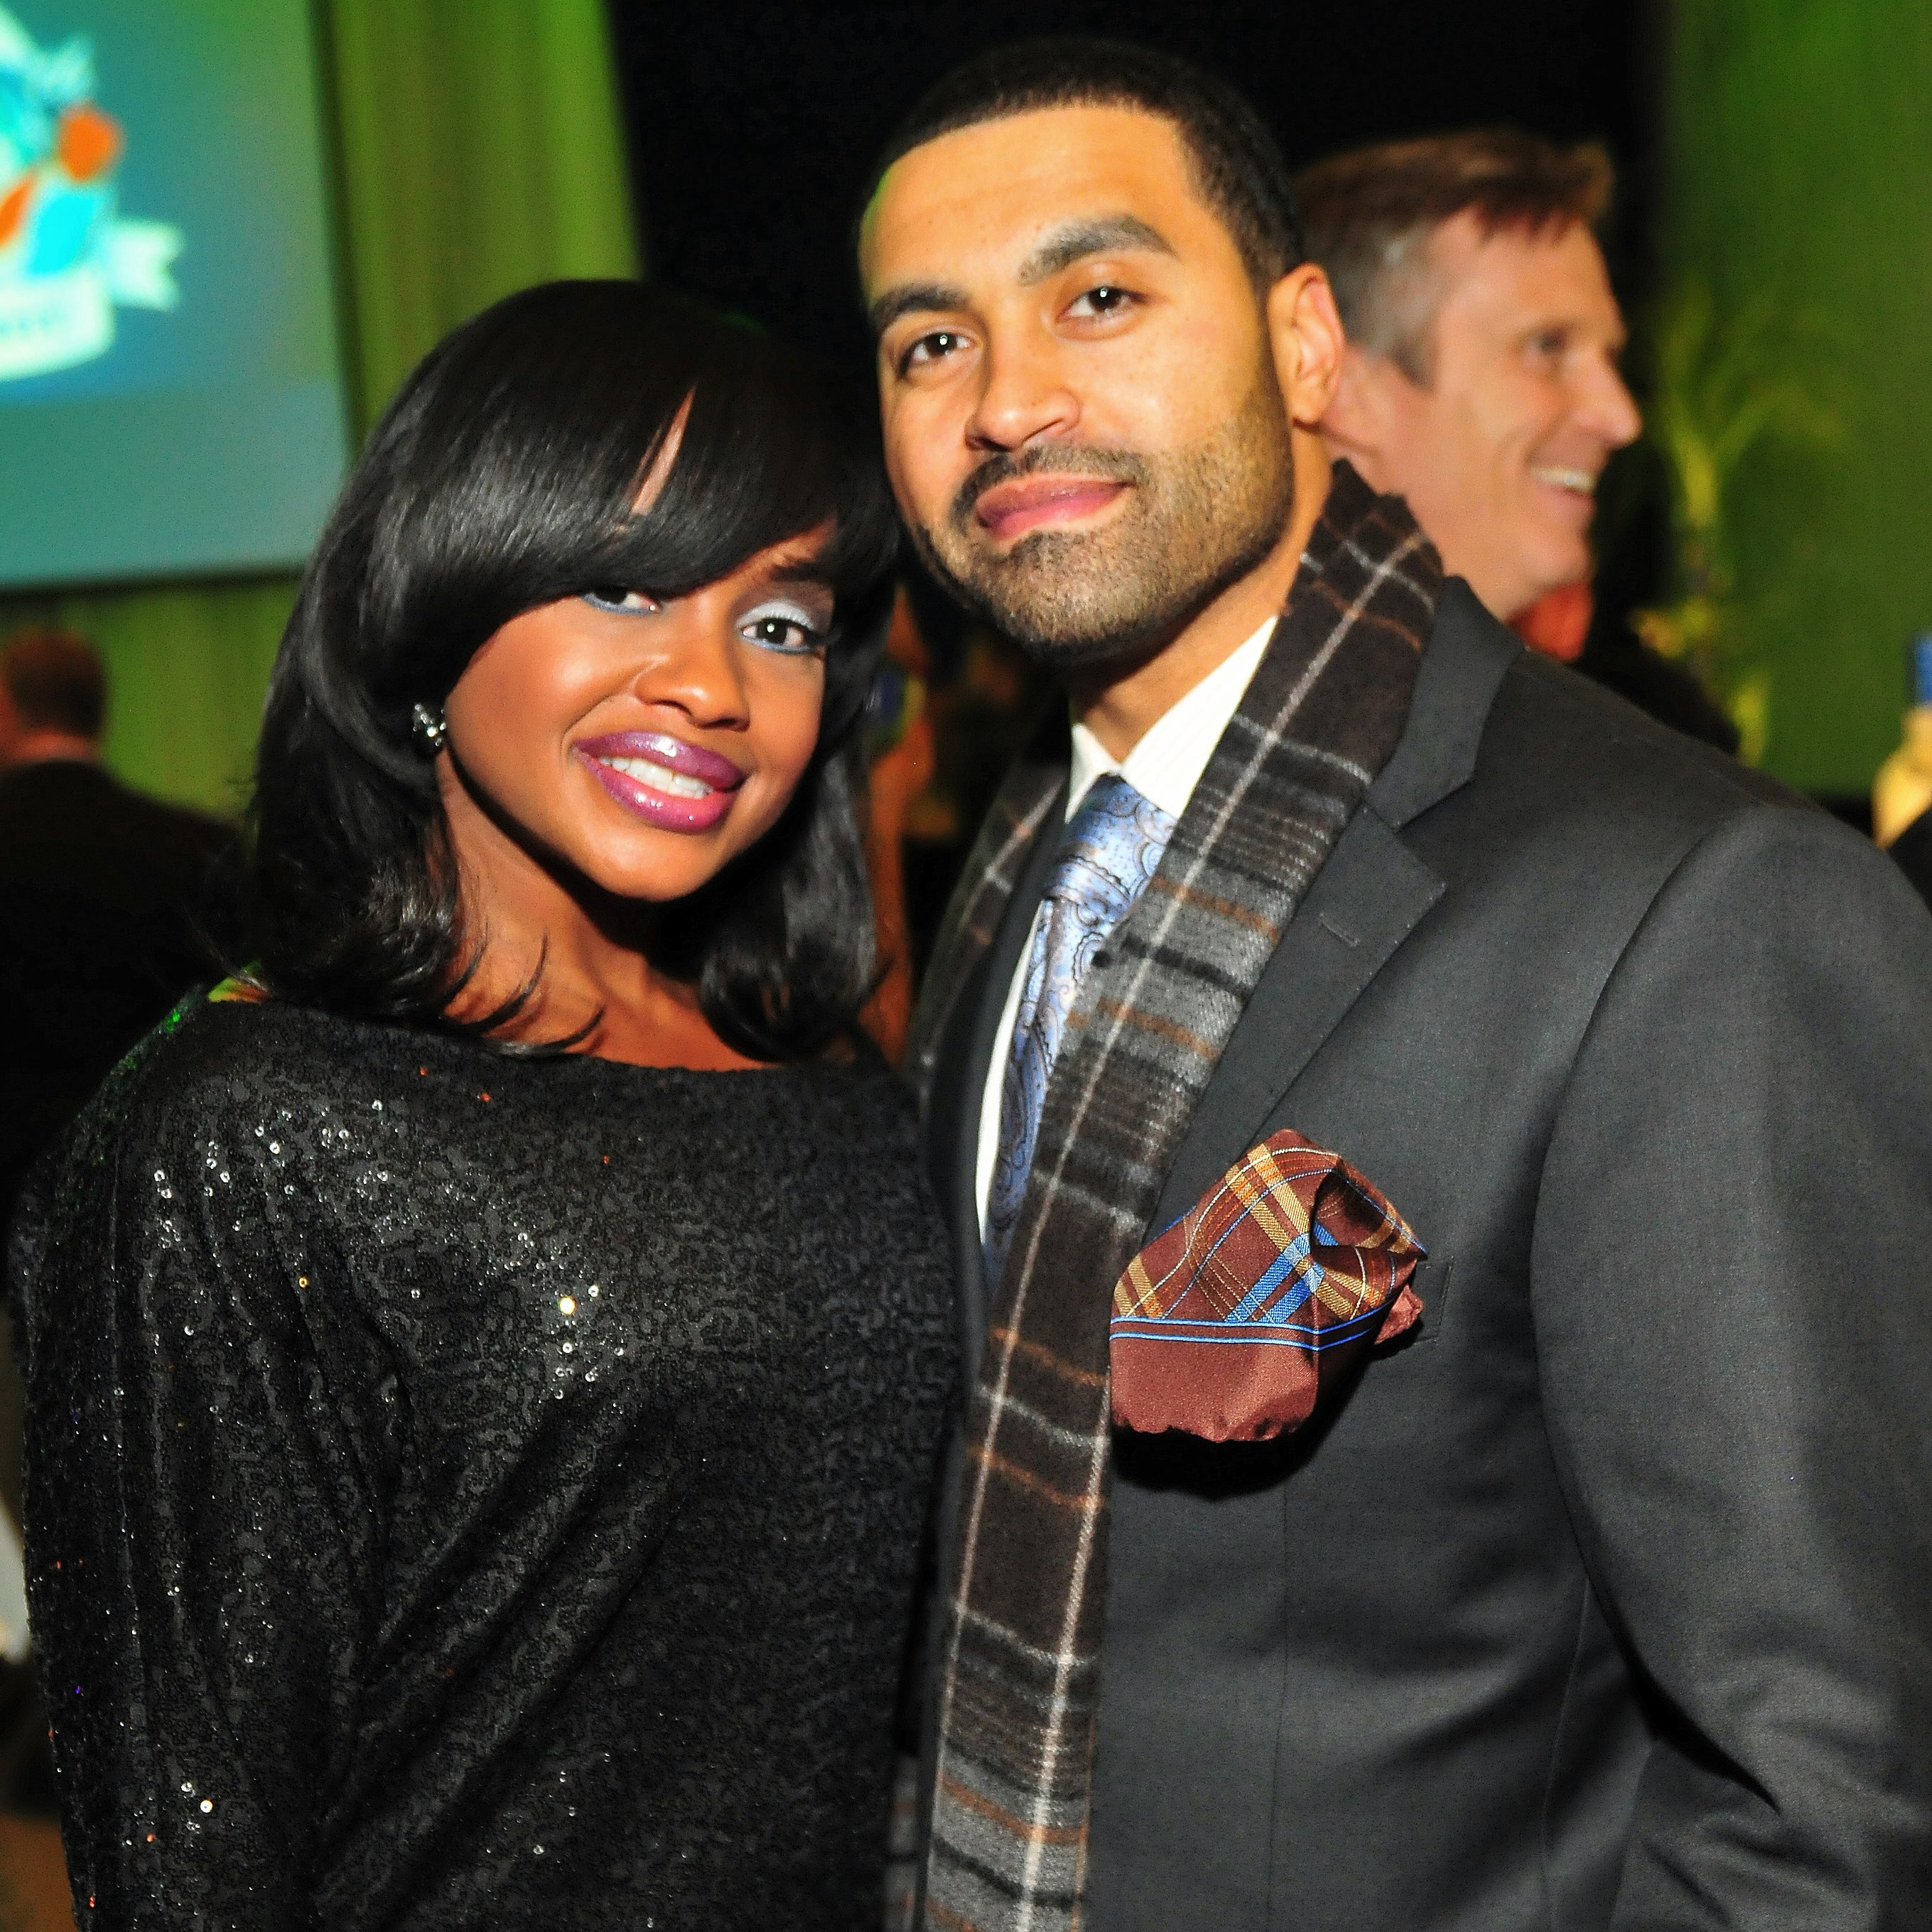 Phaedra Parks' Divorce Is Finalized: RHOA Star Opens Up About Ending Her Marriage and Dating as a Single Mom
